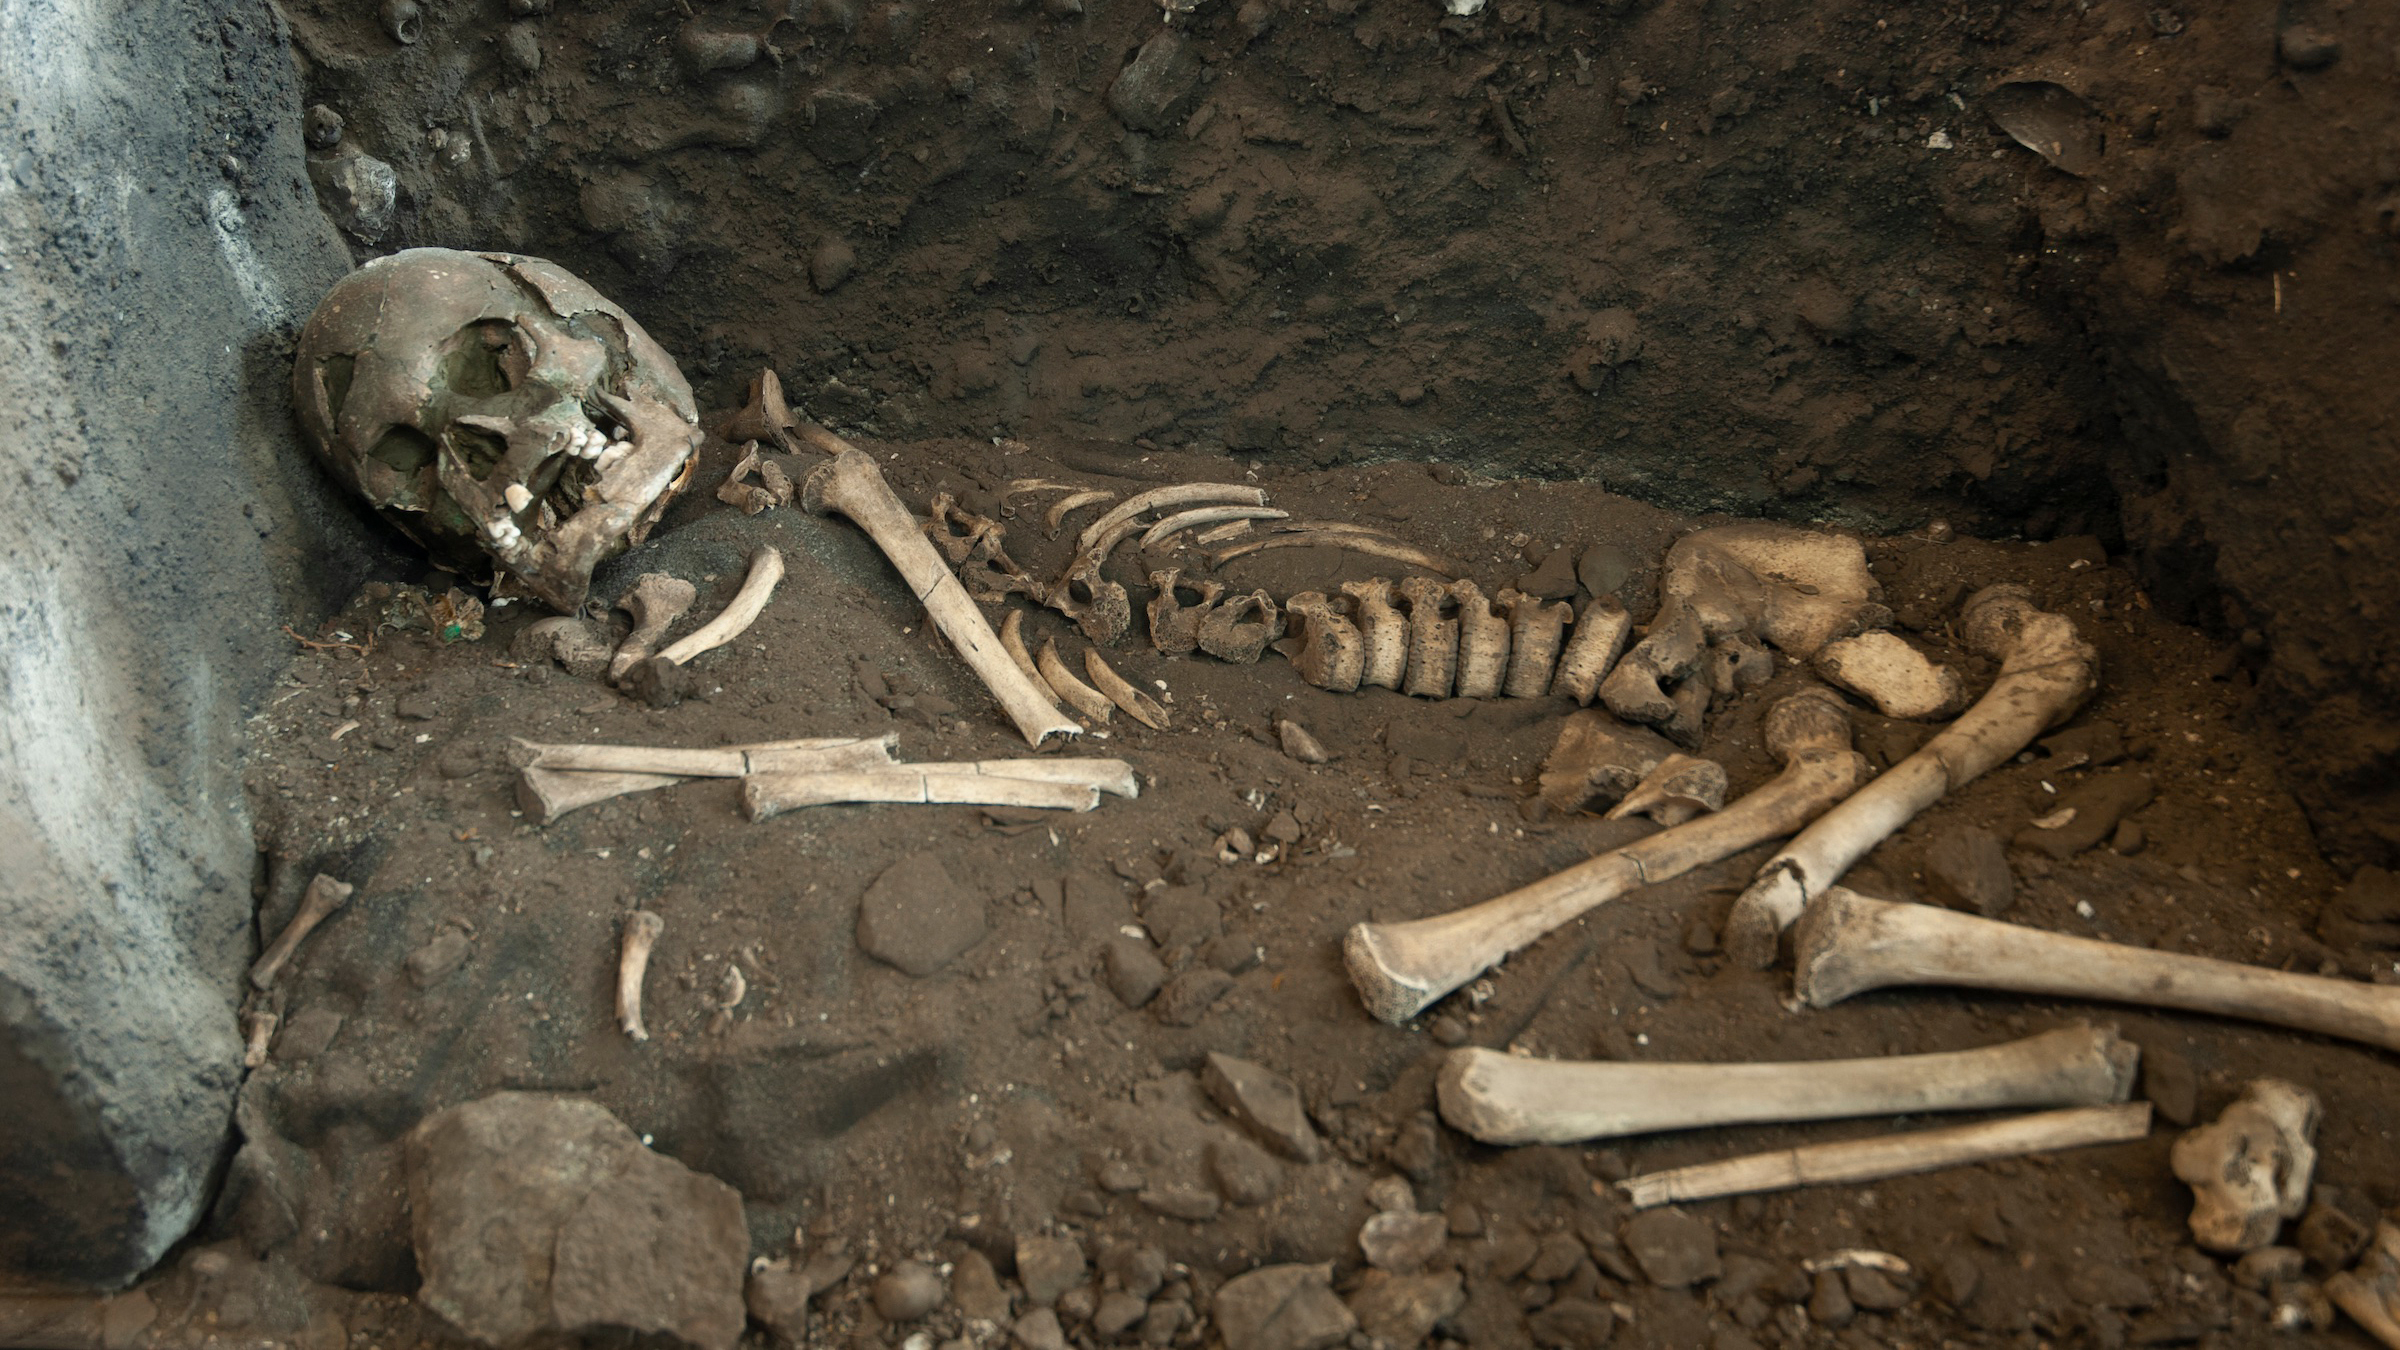 We see a skeleton on its side, in a somewhat crouching position on the dirt floor next to a cave wall.